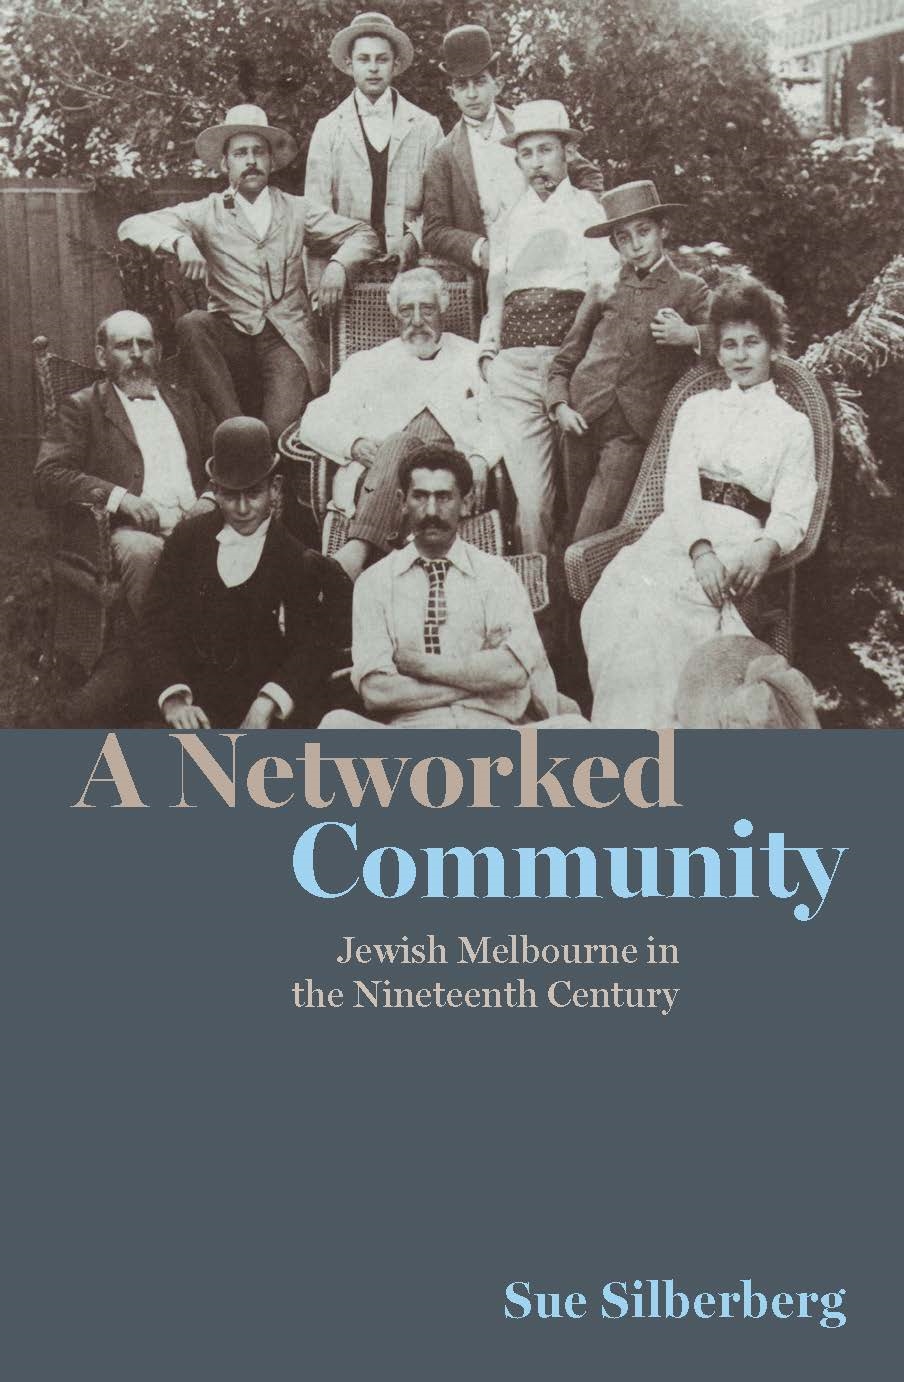 A Networked Community